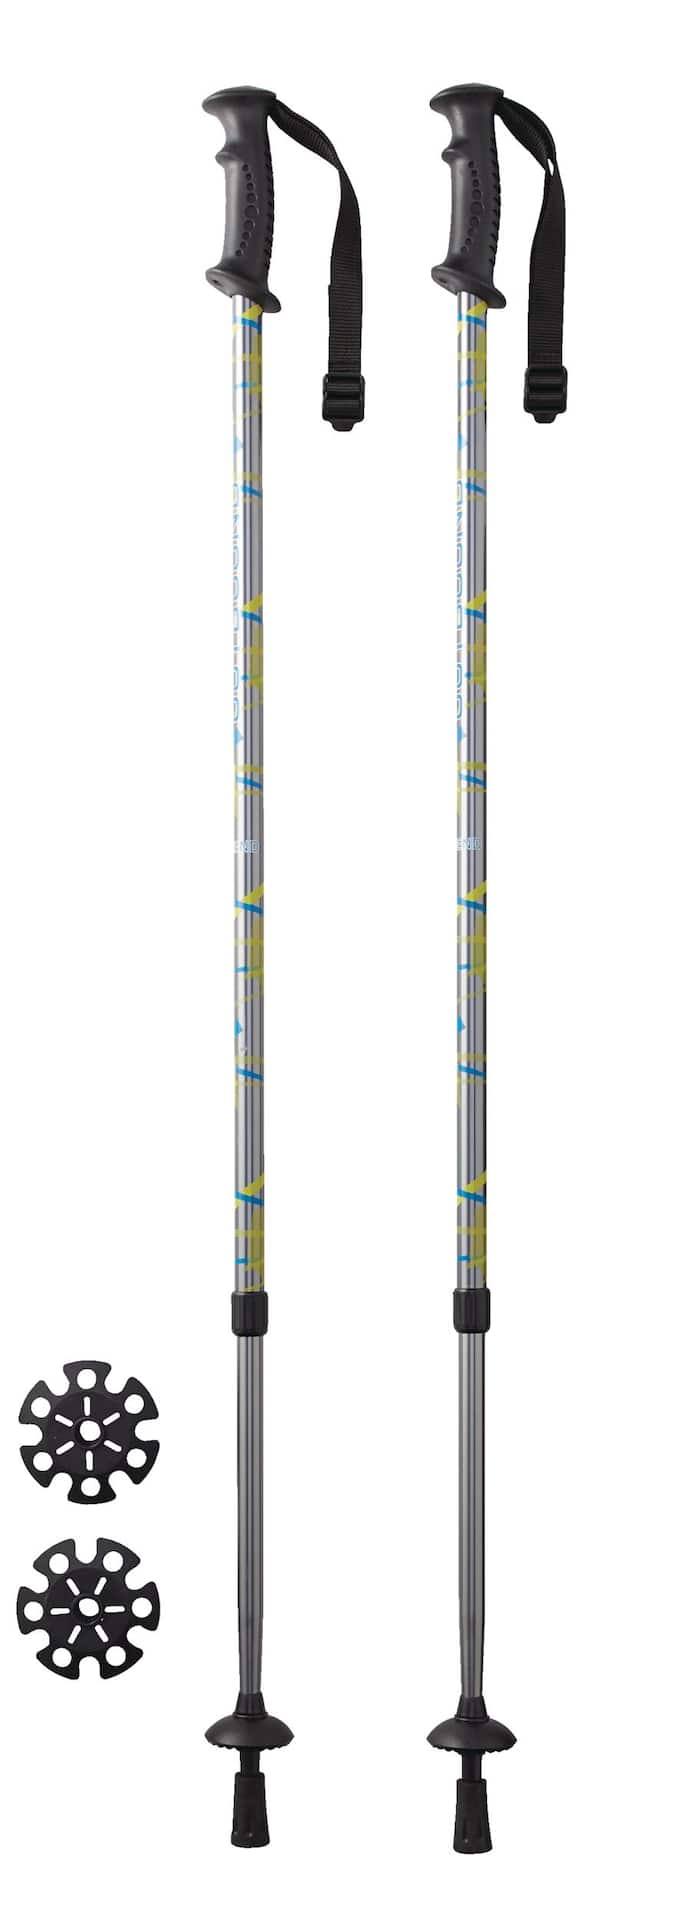 https://media-www.canadiantire.ca/product/playing/camping/camping-accessories/0765885/outbound-ascend-trekking-poles-372e3601-2553-4c8a-ab19-5a7dead0f366-jpgrendition.jpg